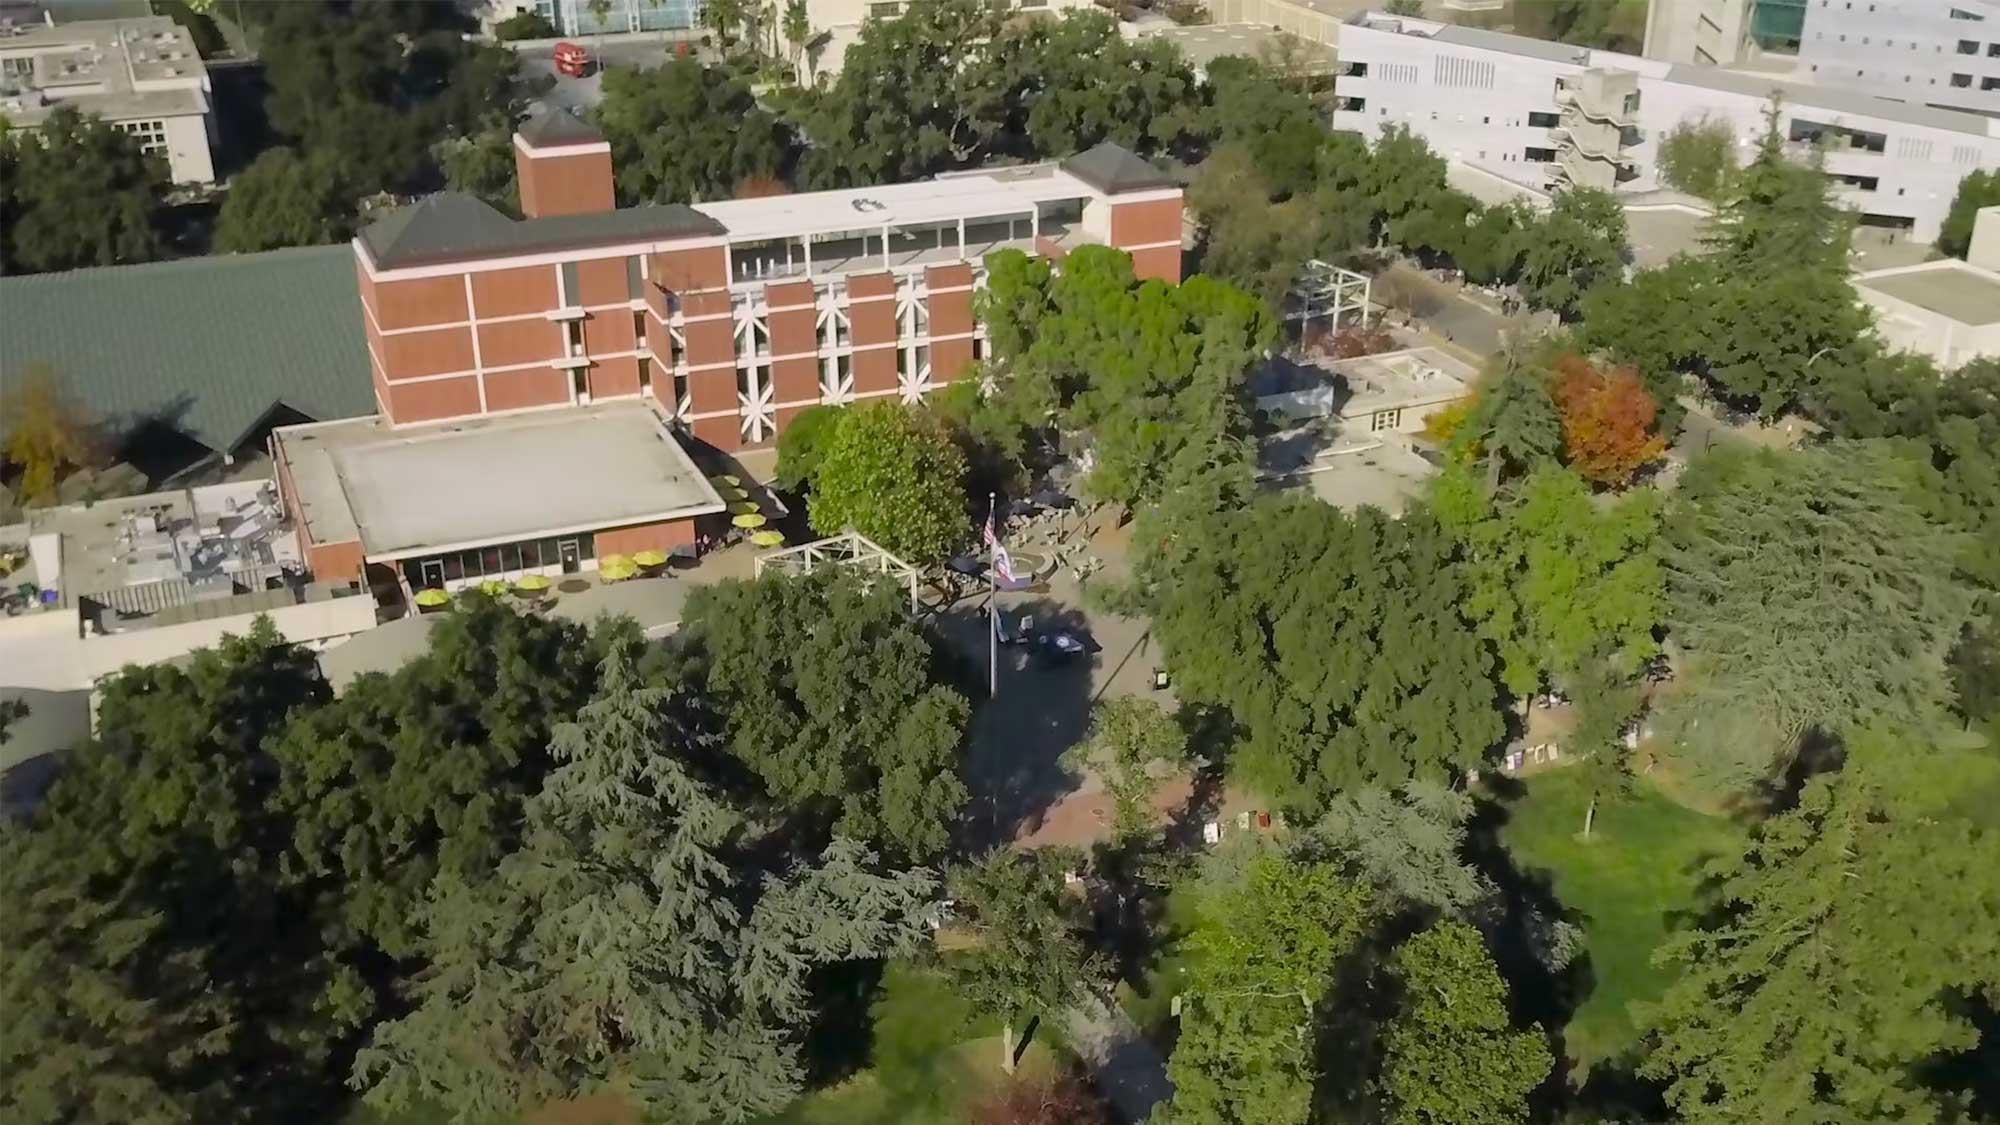 aerial view of the UC Davis campus showing some buildings surrounded by trees